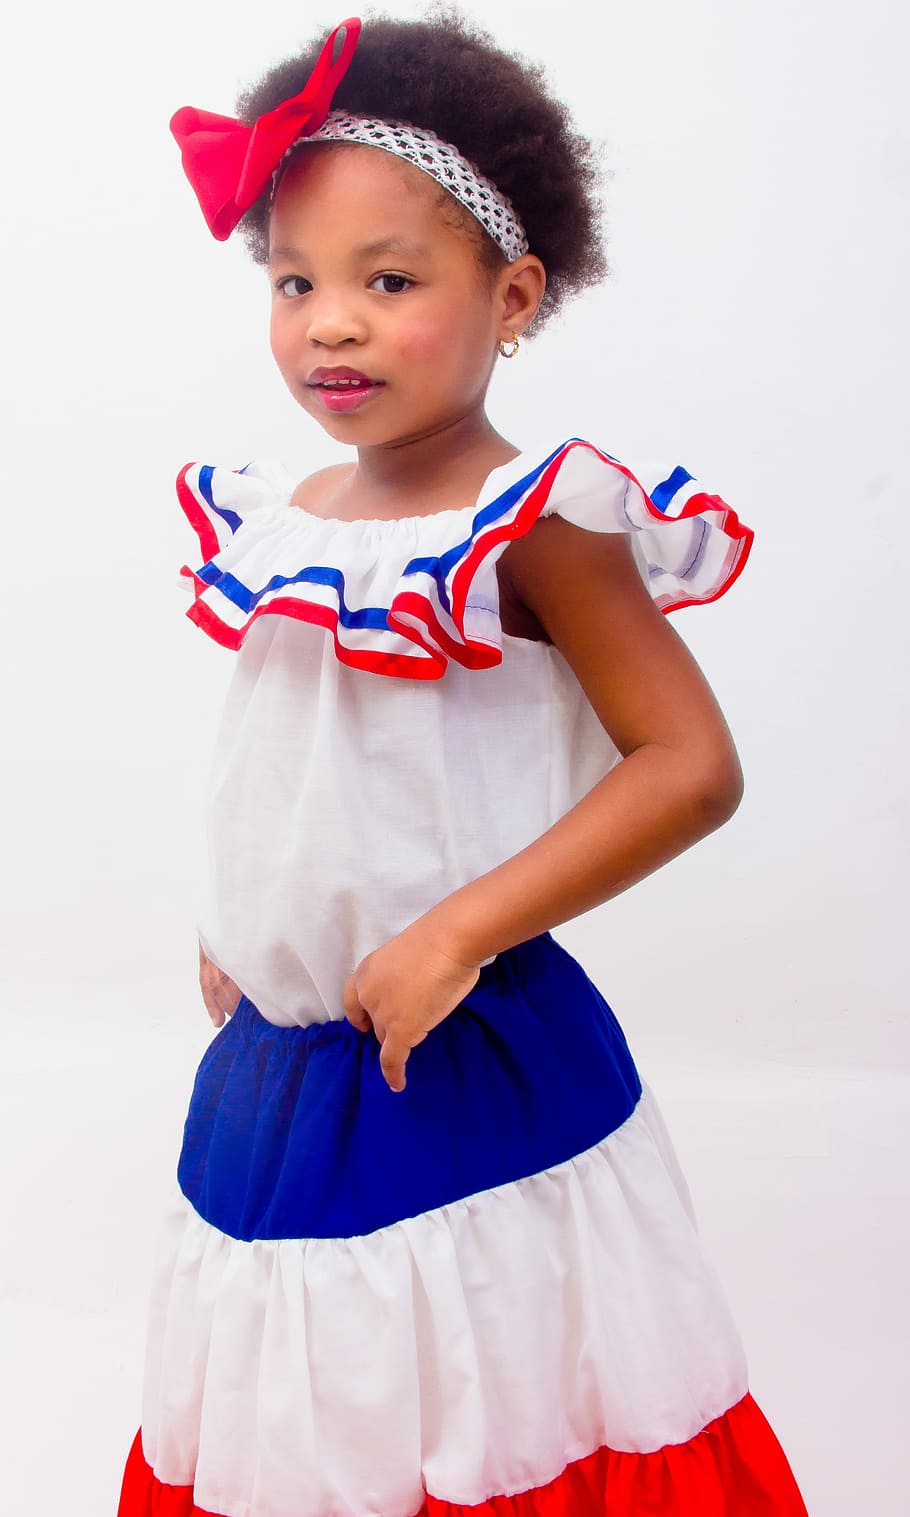 Dominican, Girl, Dress, dominican republic, colors, red with blue, blue with red, smiling, happy, child